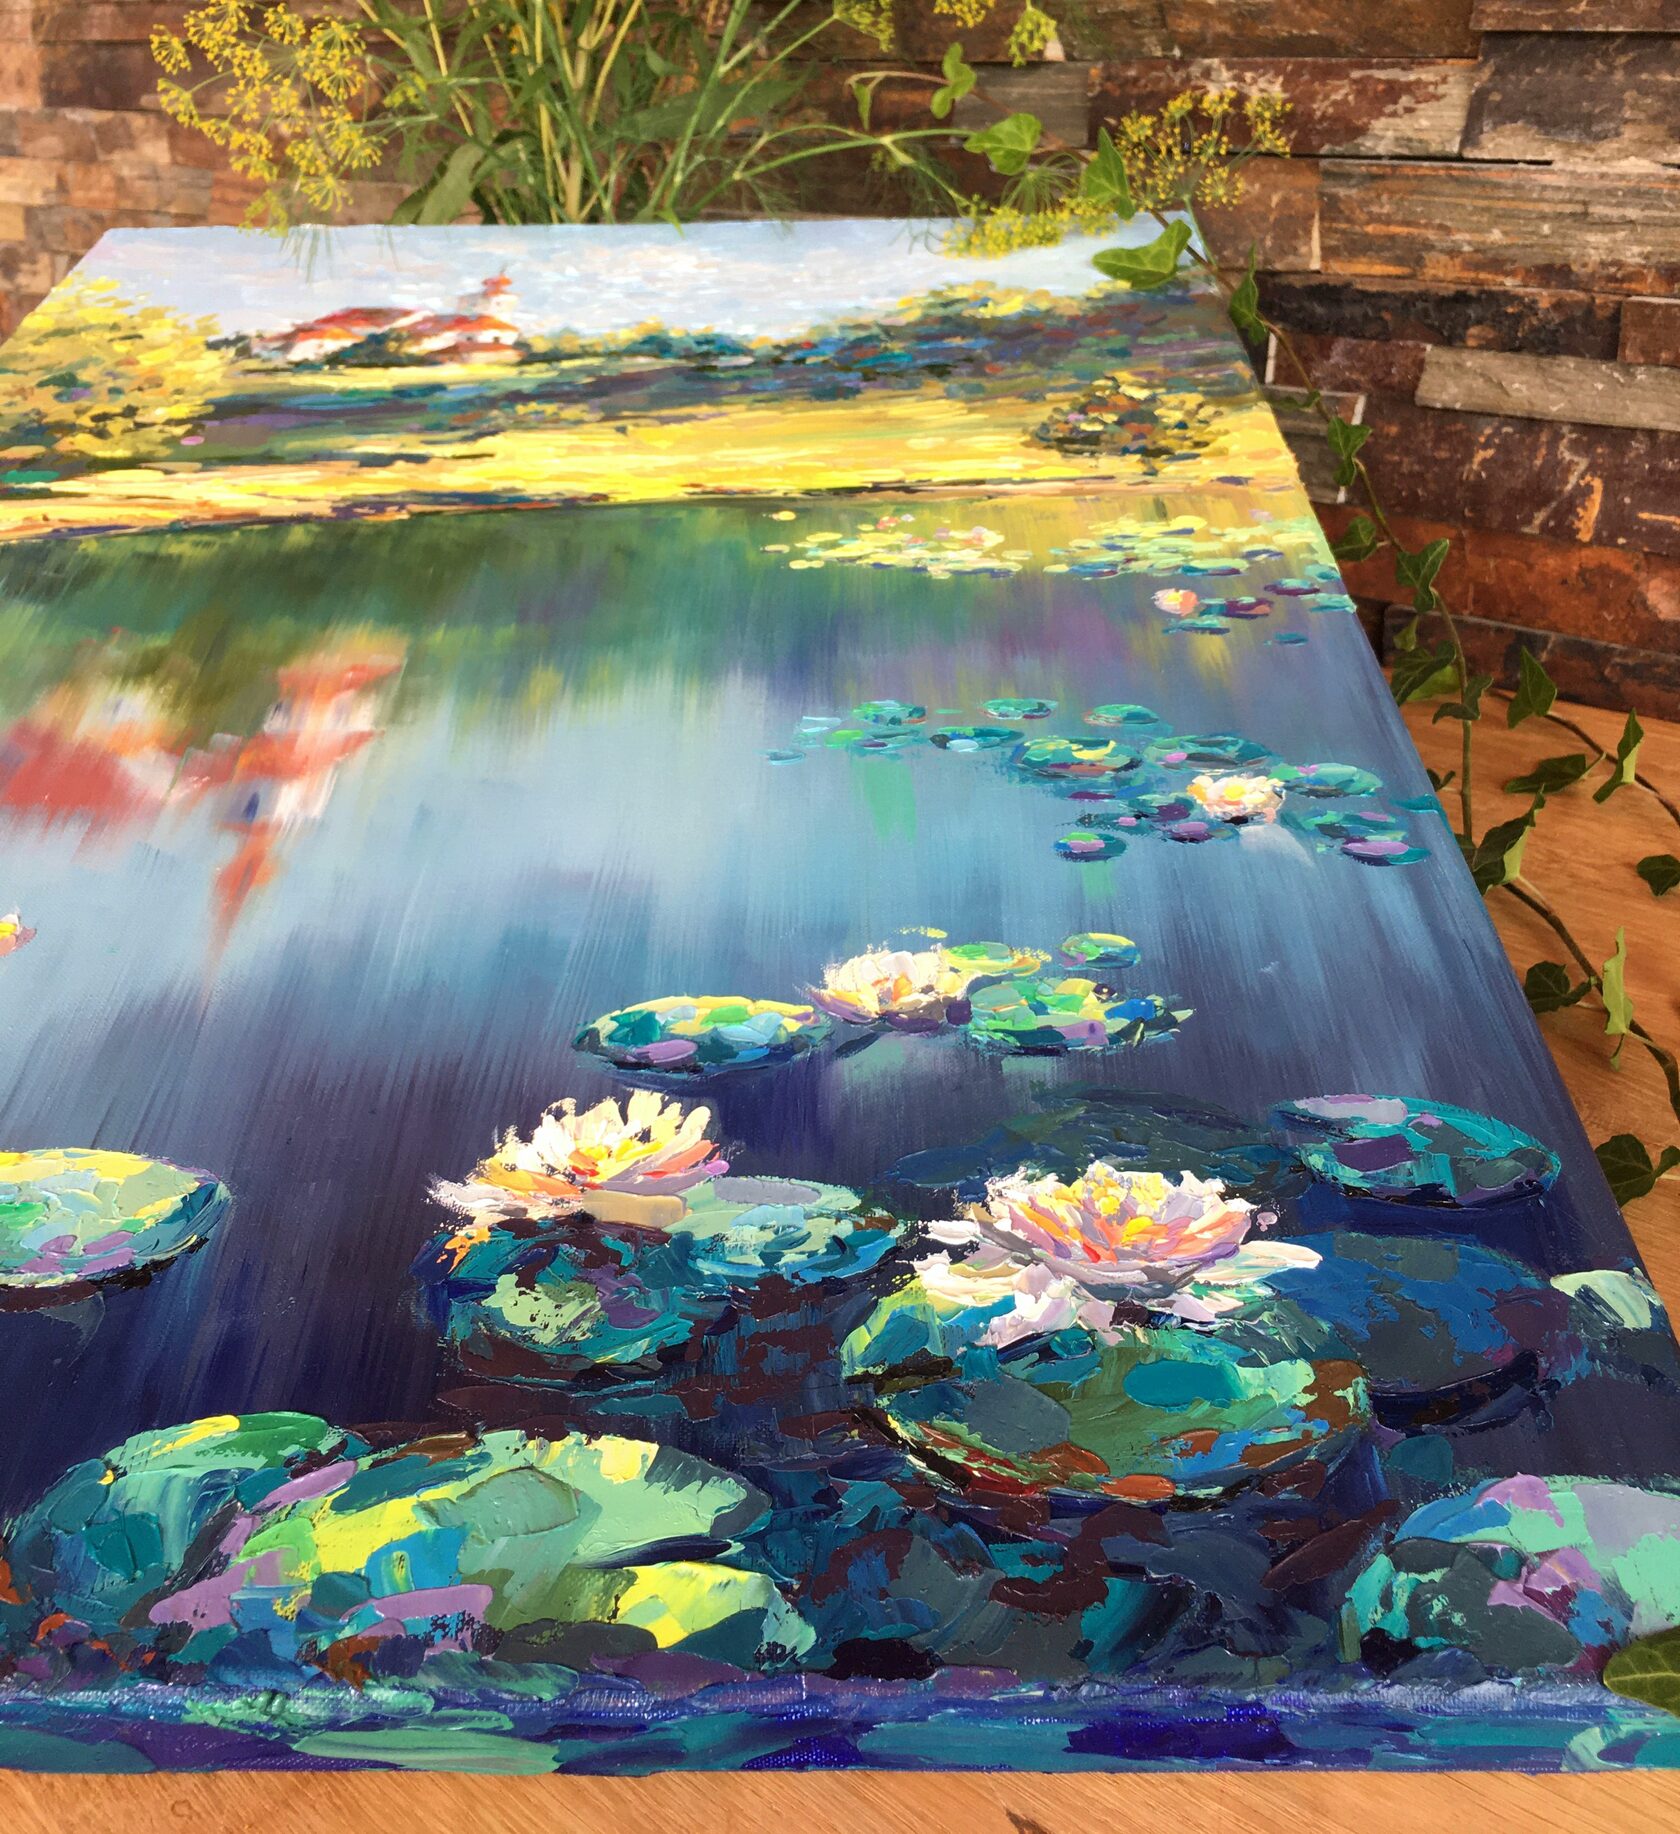 Landscape in oils, lake with water lilies